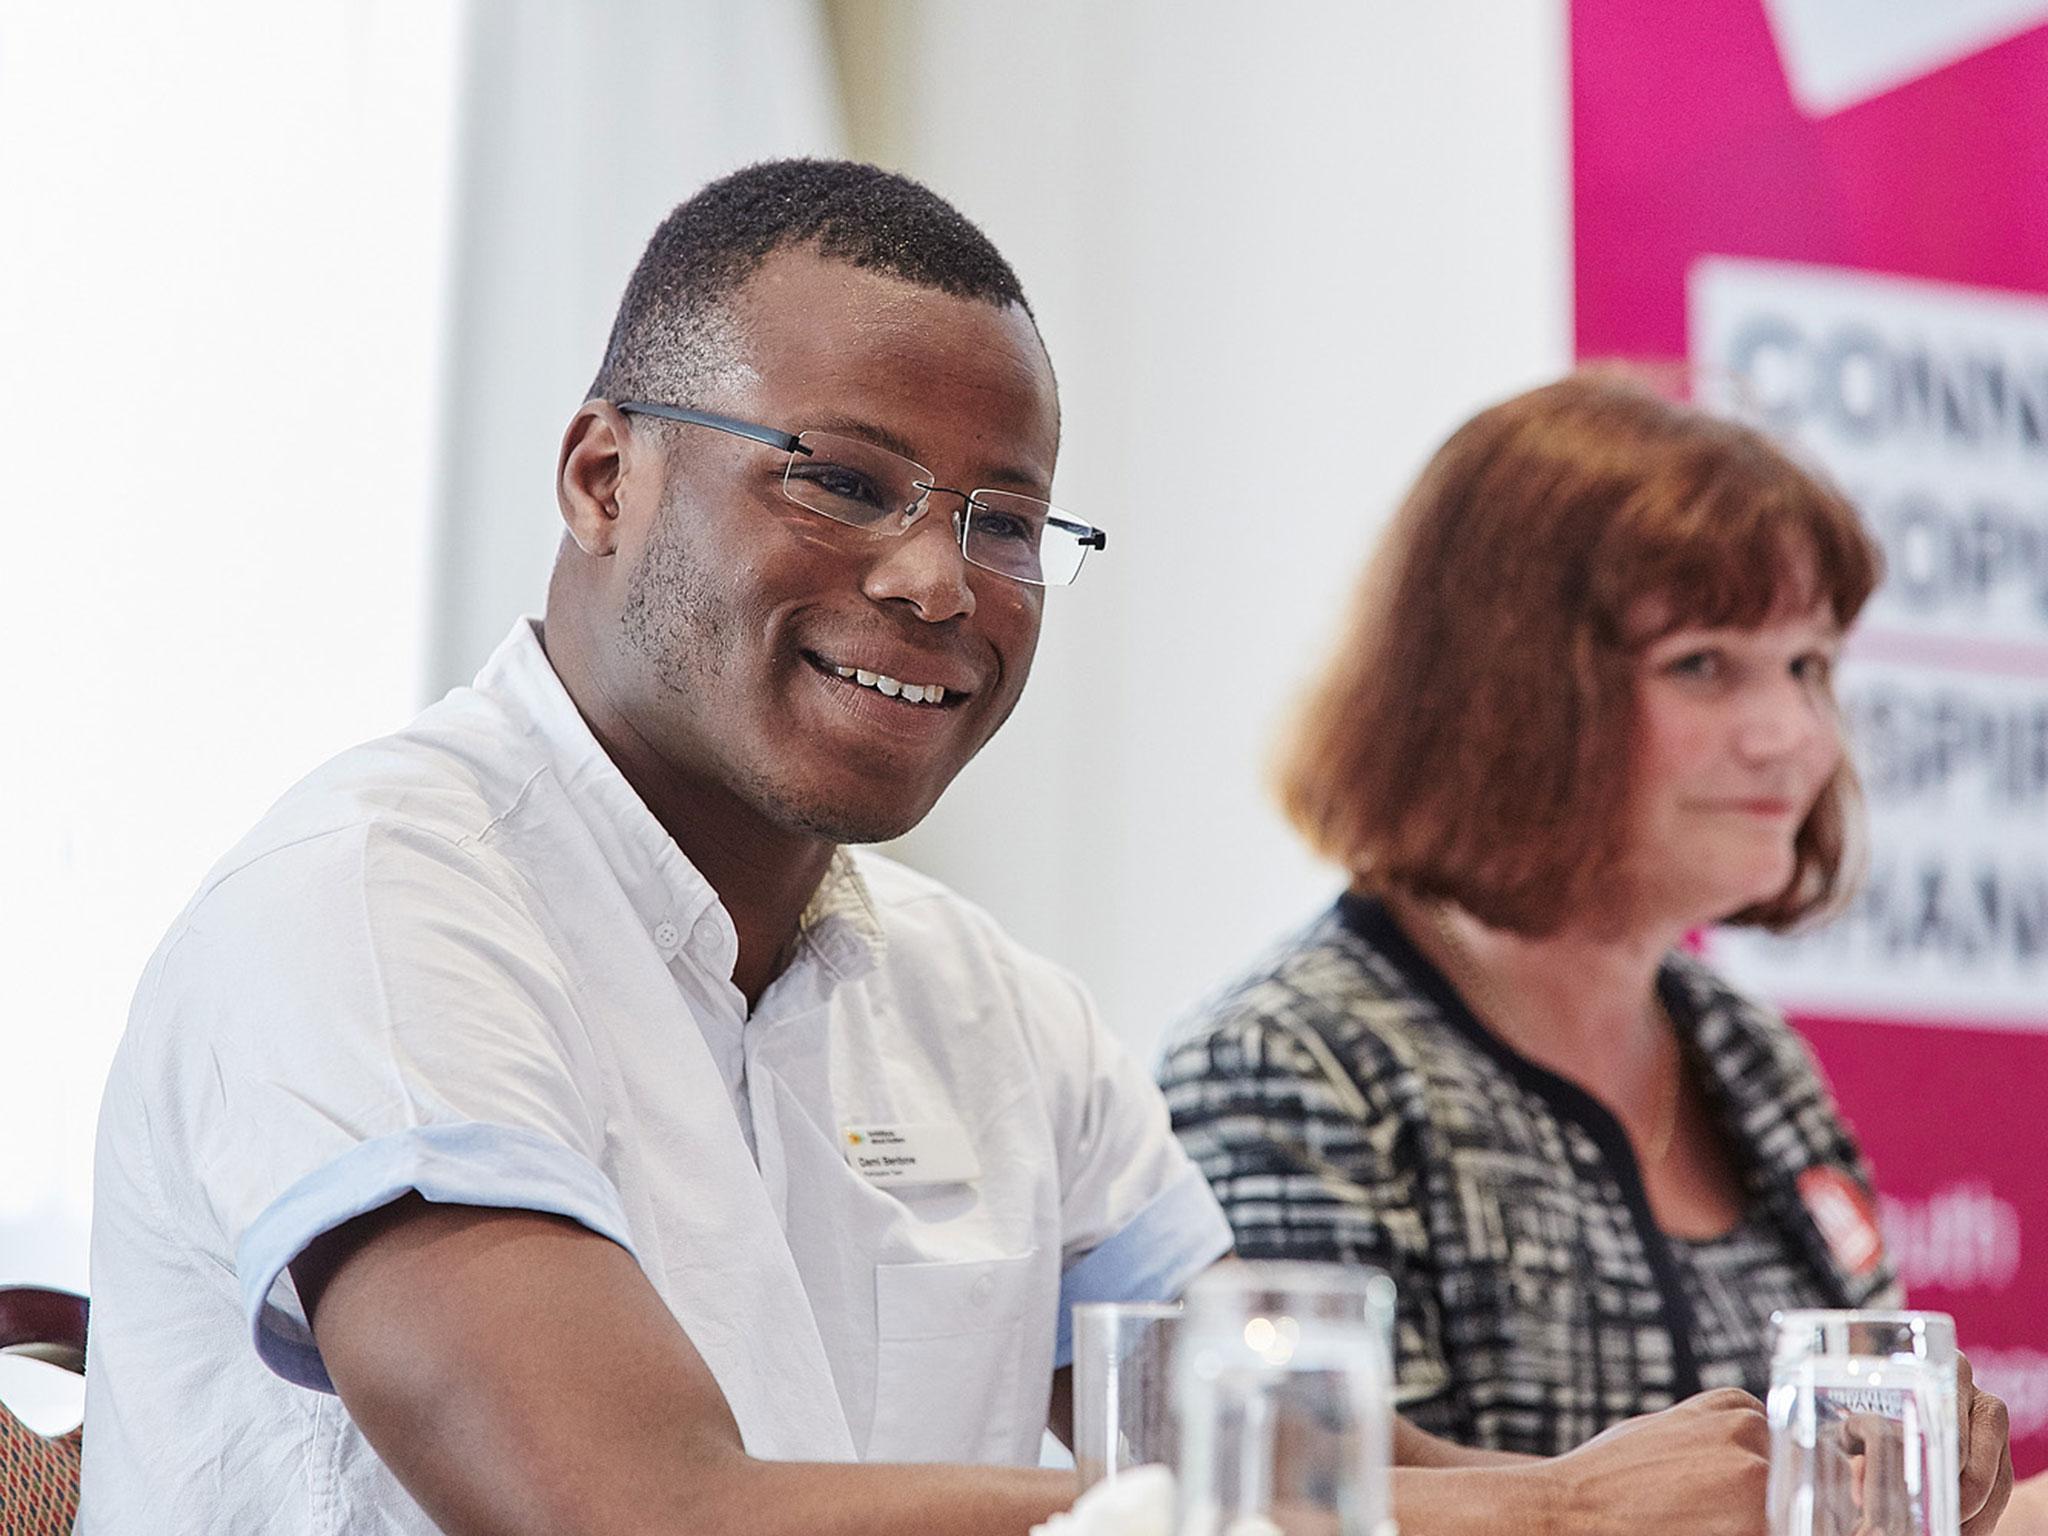 Dami Benbow with Julie Cooper MP, speaking at a EU referendum event.